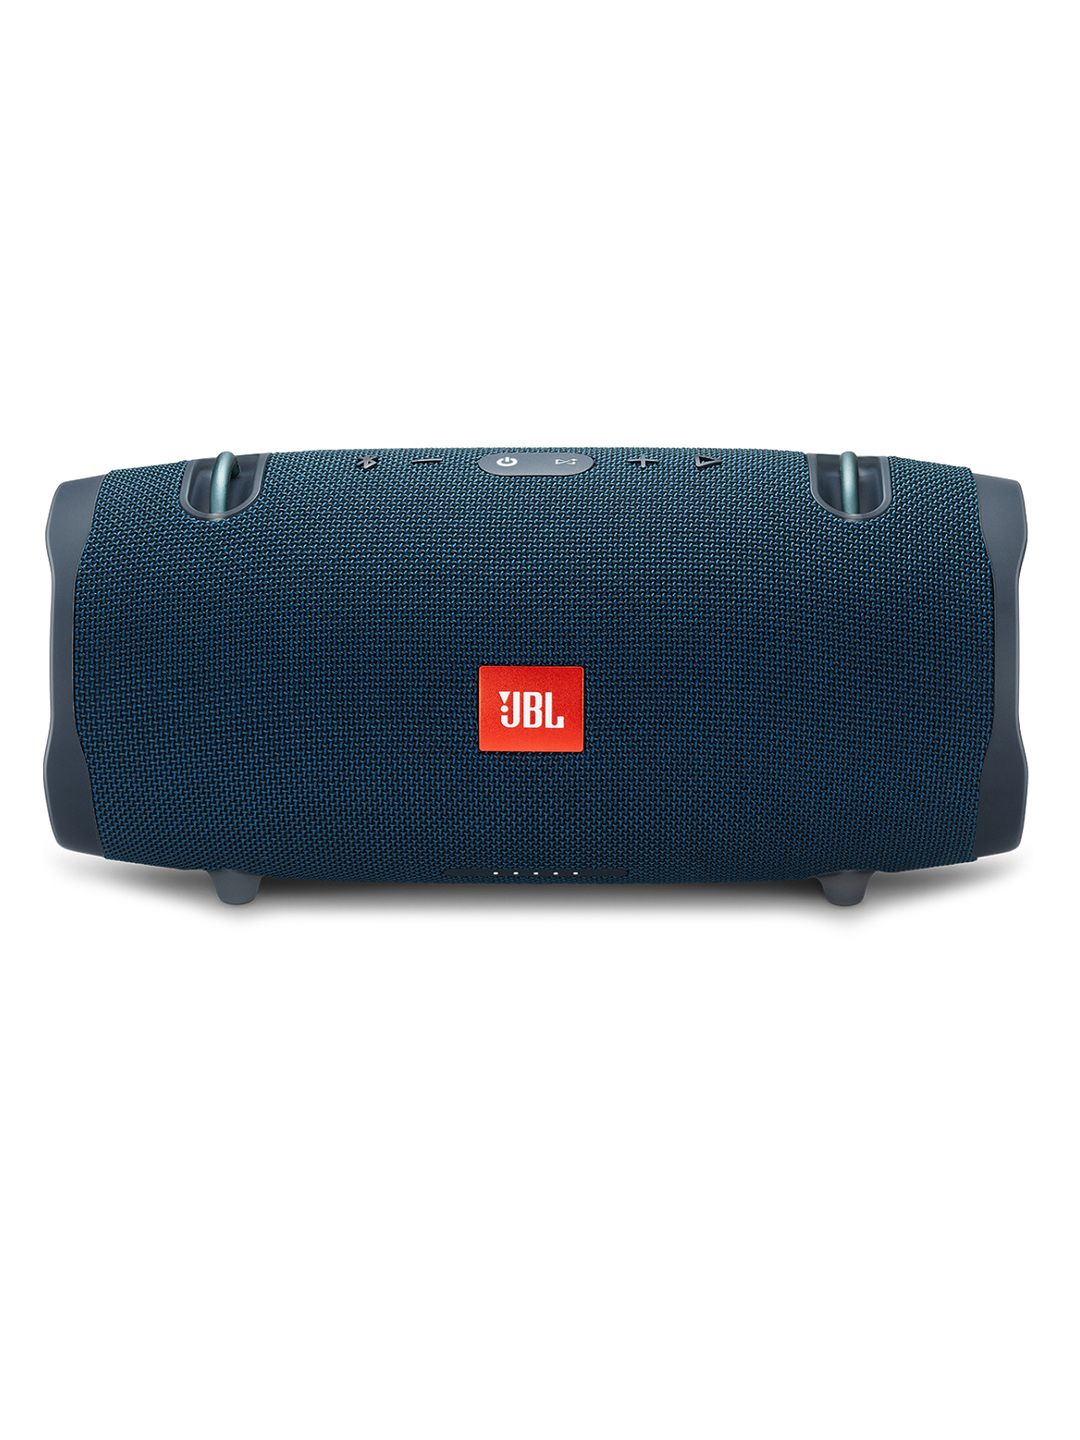 JBL Blue Xtreme 2 Bluetooth Speaker Price in India